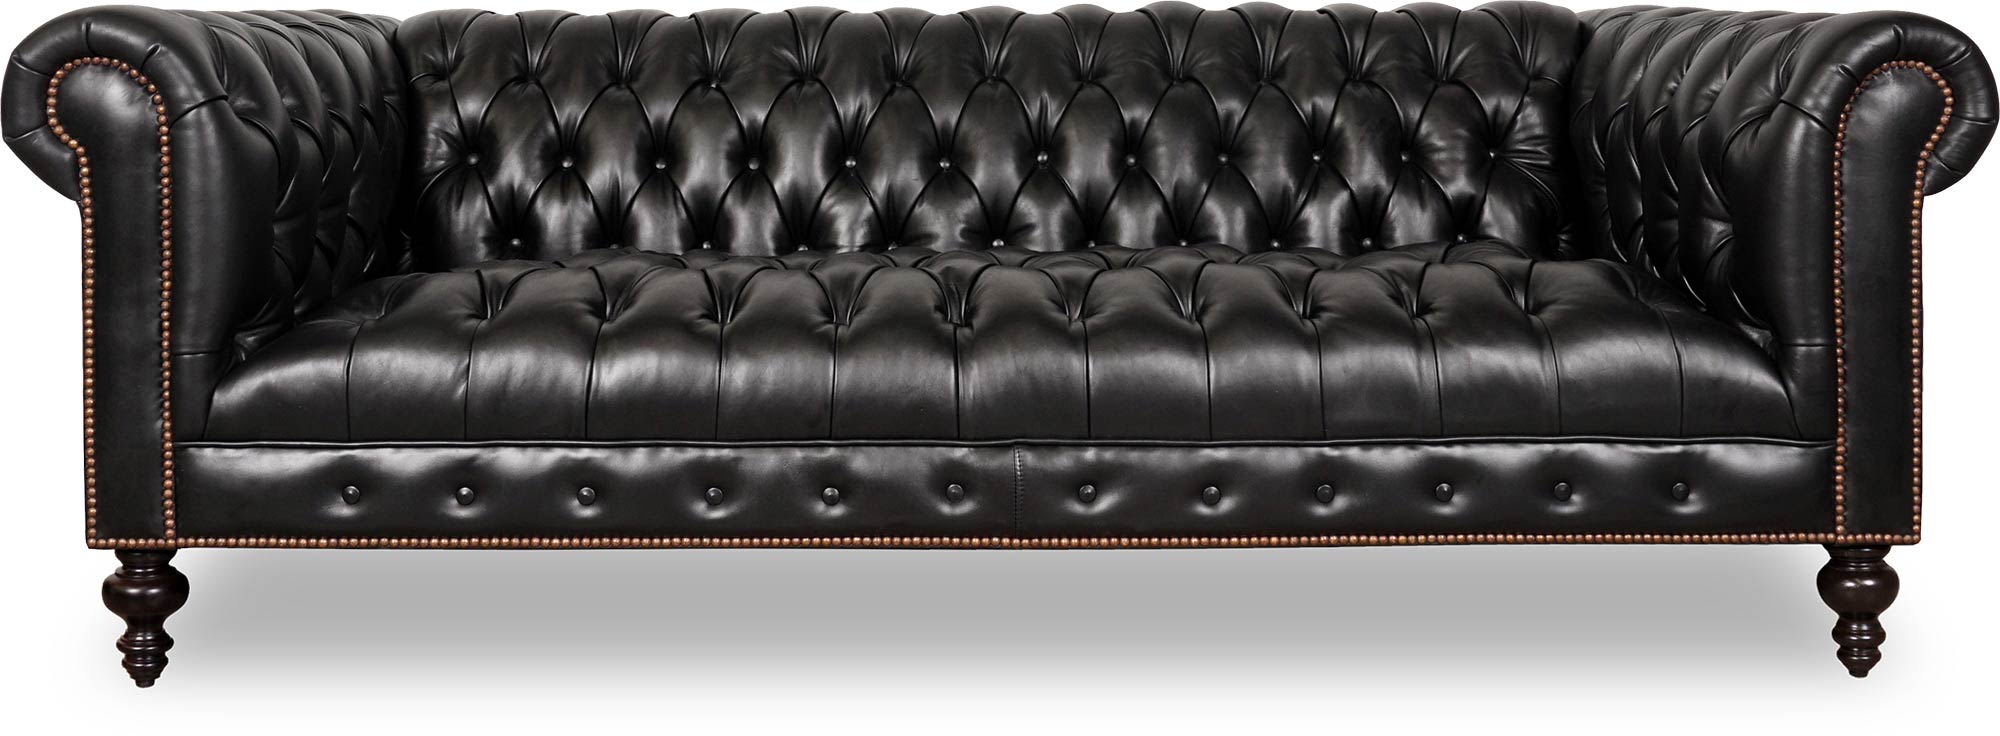 Chesterfield Sofas Armchairs, Leather Sofa Chesterfield